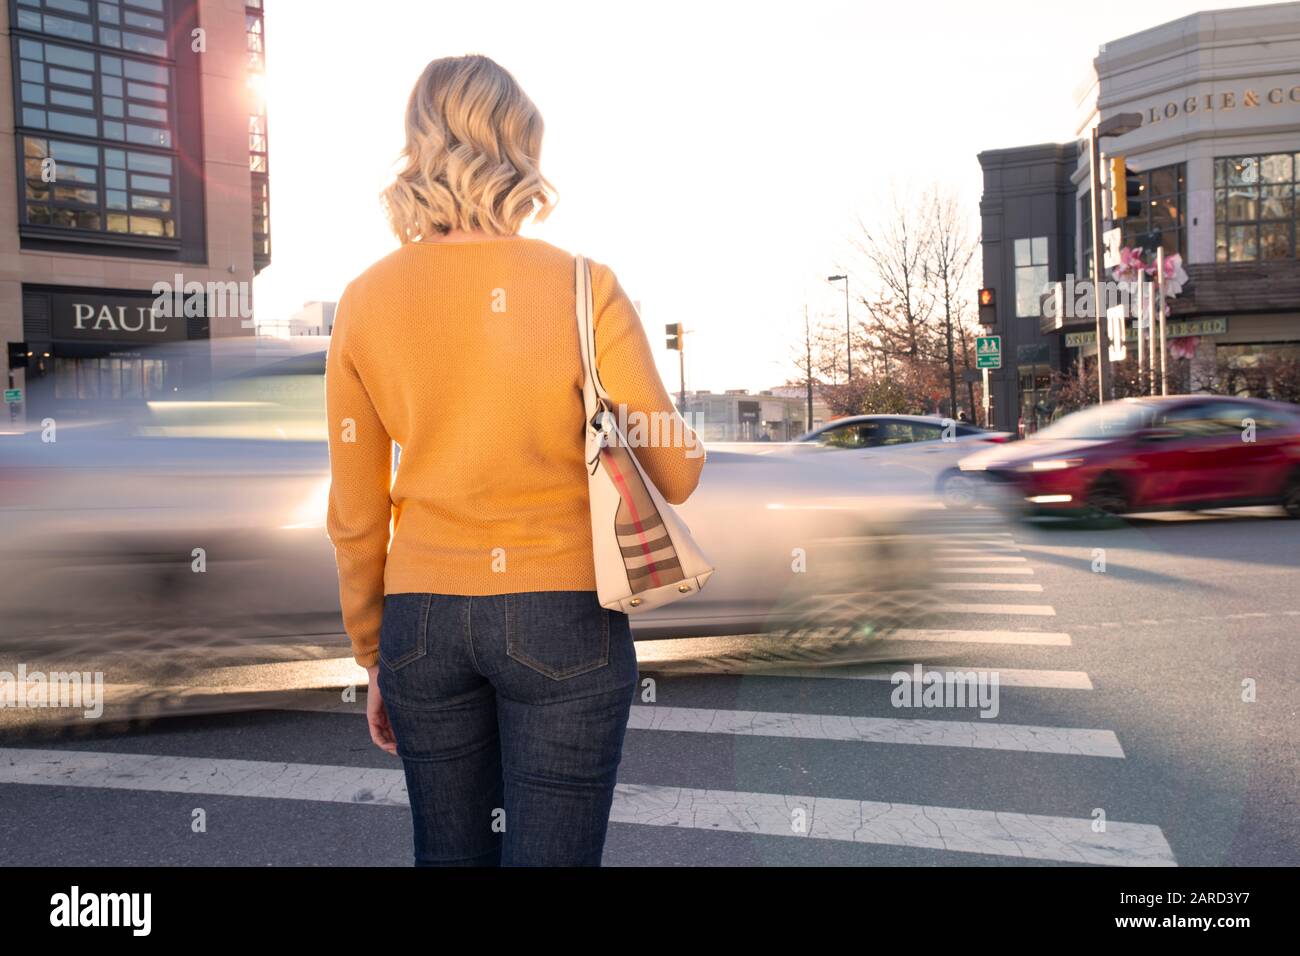 USA Maryland Bethesda Pedestrian safety woman crossing in a crosswalk with car traffic Stock Photo